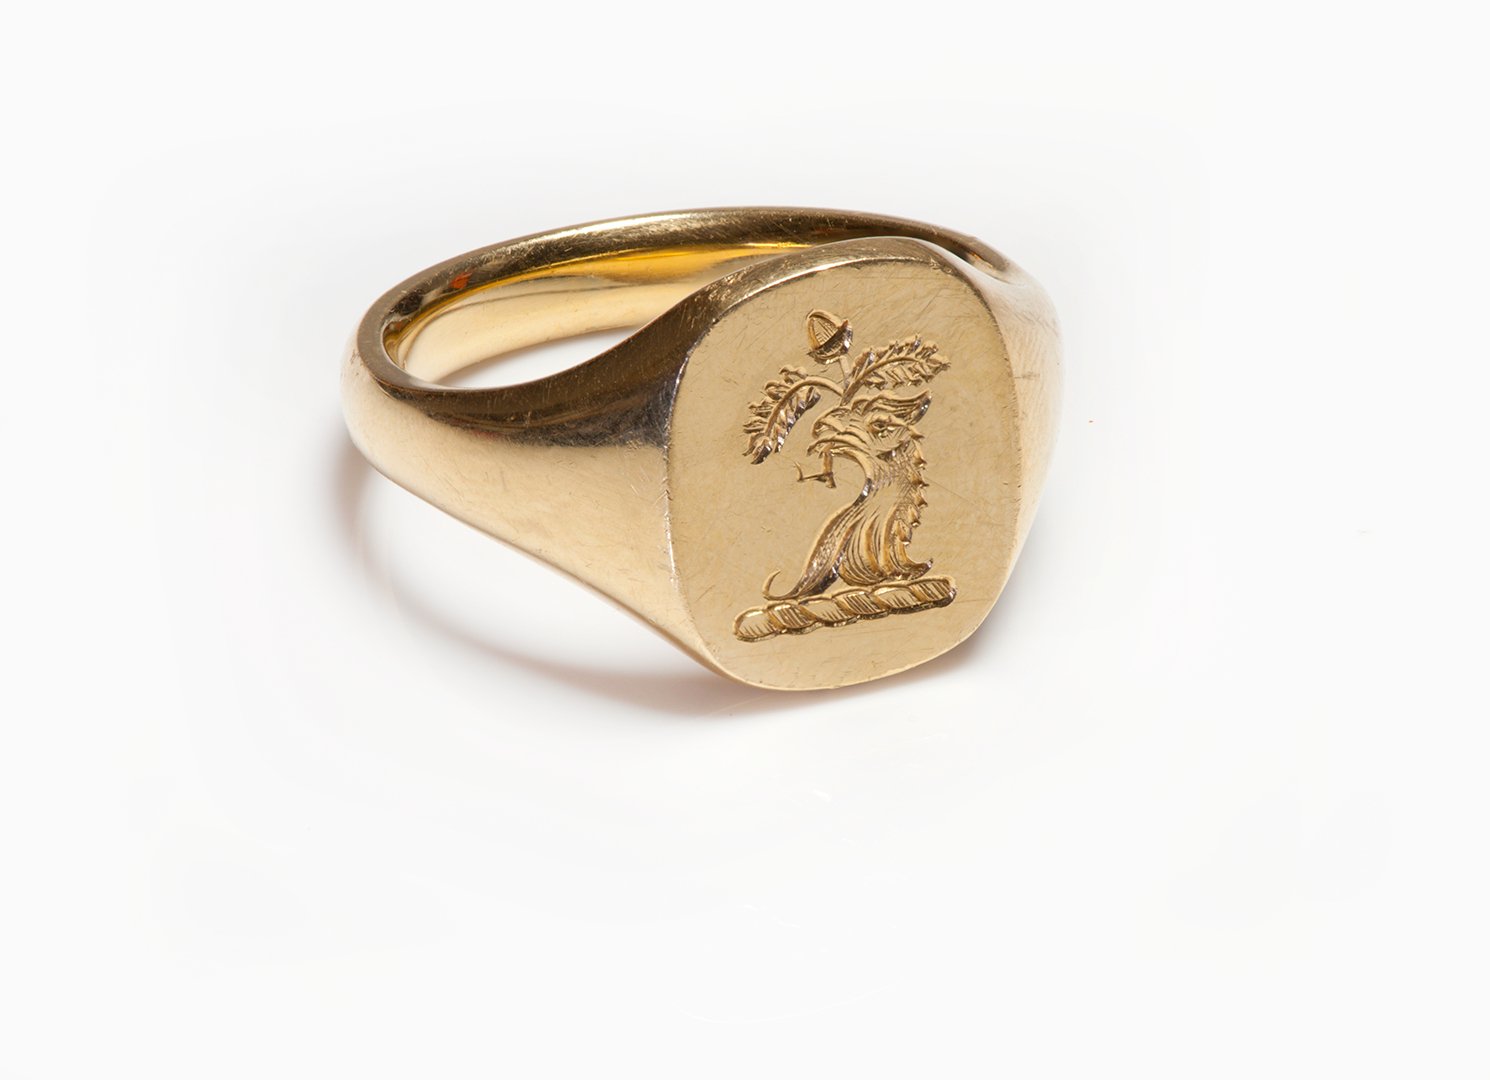 Antique 18K Yellow Gold Crest Men's Ring - DSF Antique Jewelry